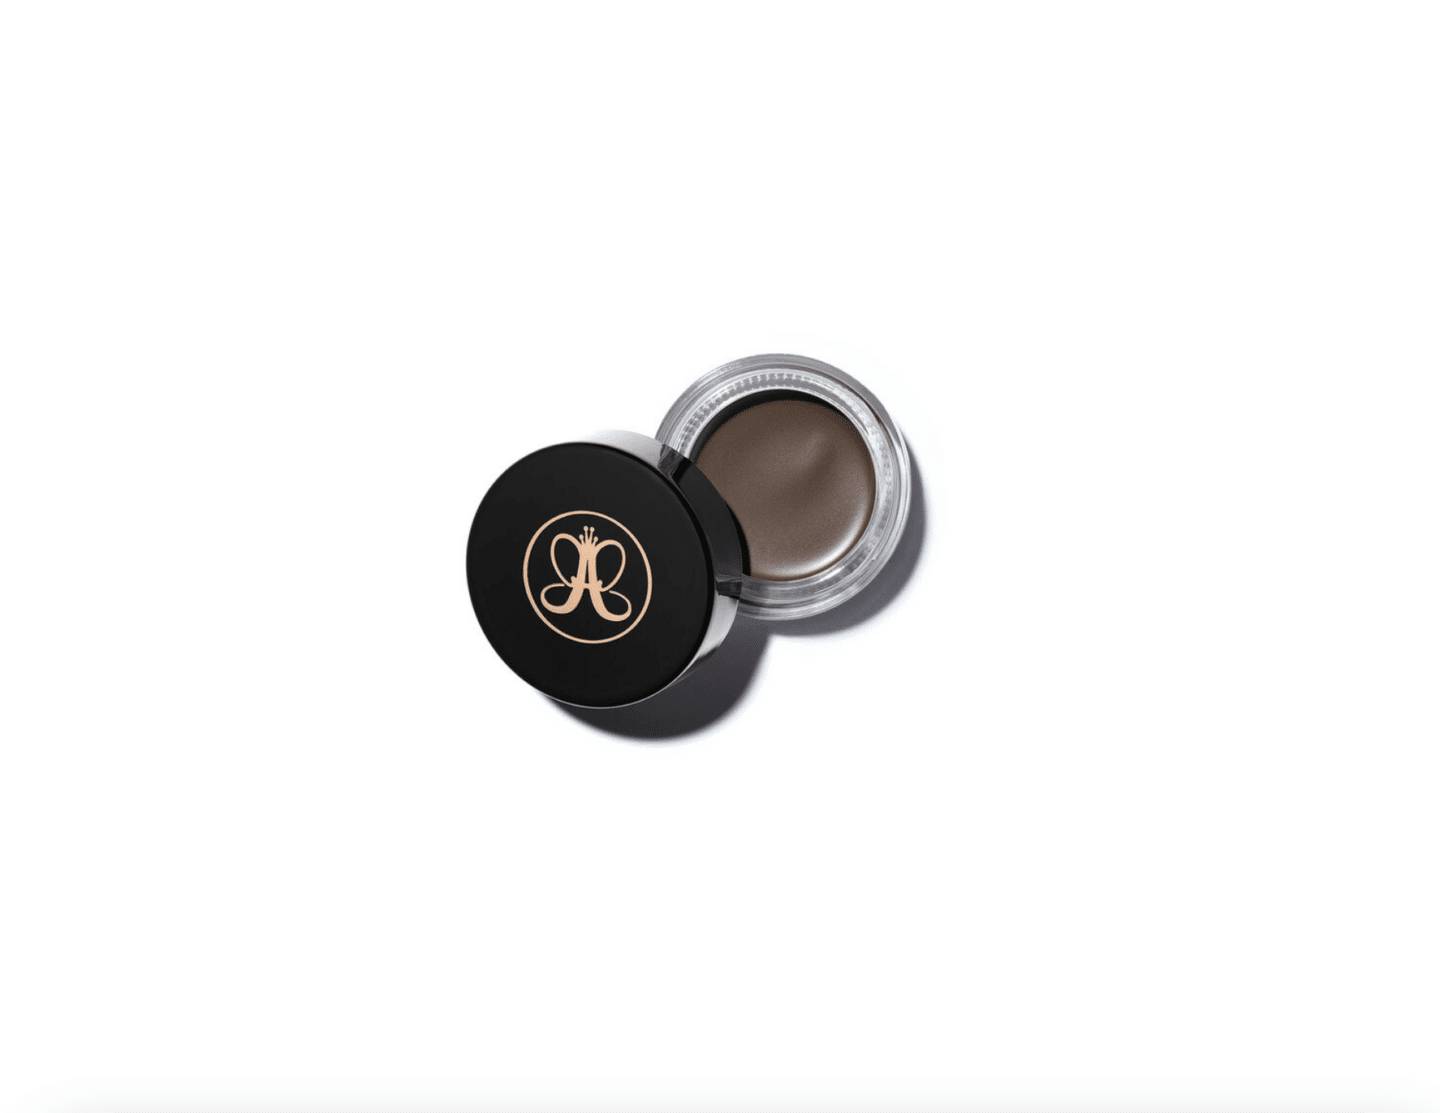 Best Eyebrow Pomade, by lifestyle blogger What The Fab